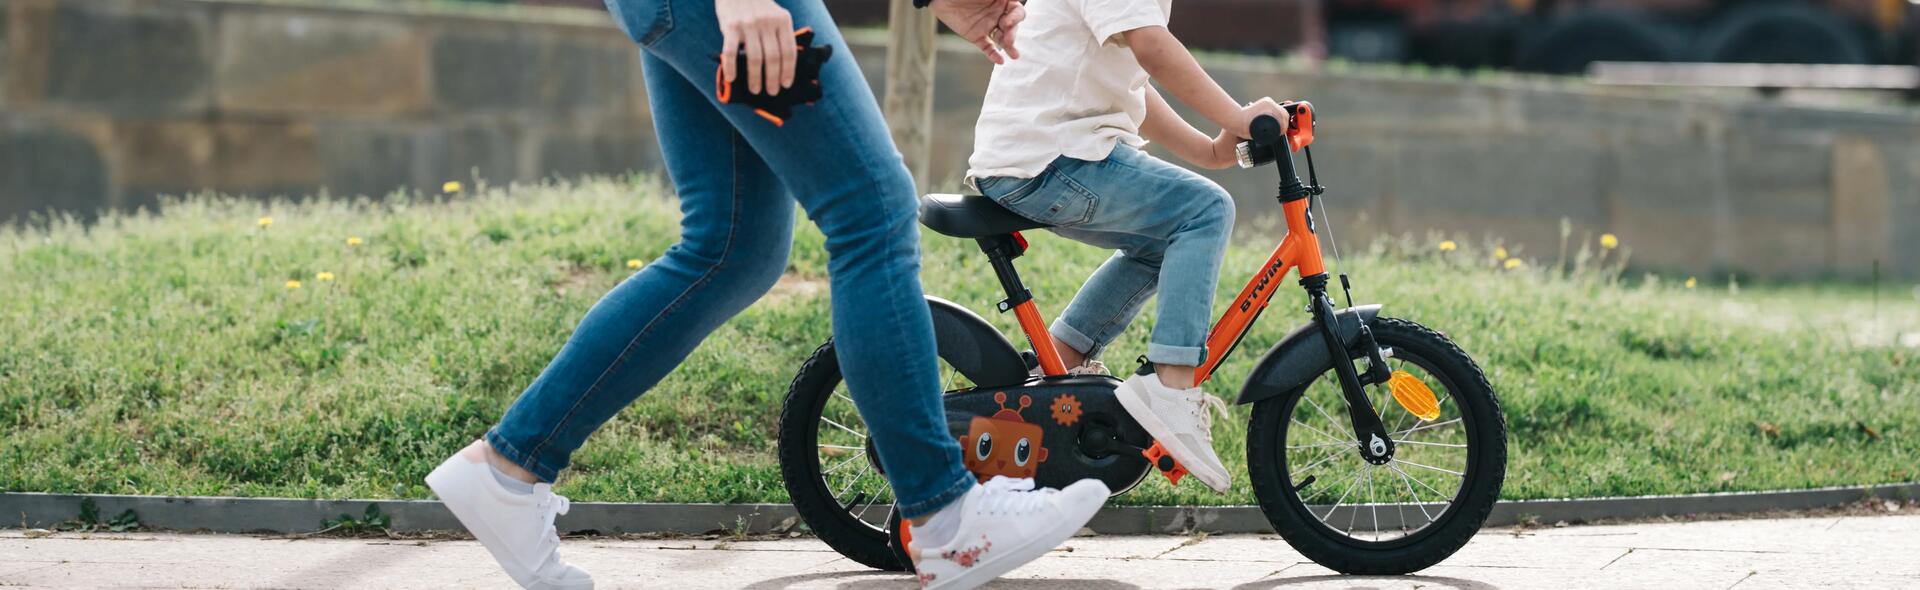 HOW TO TEACH YOUR CHILD TO RIDE A BIKE ?